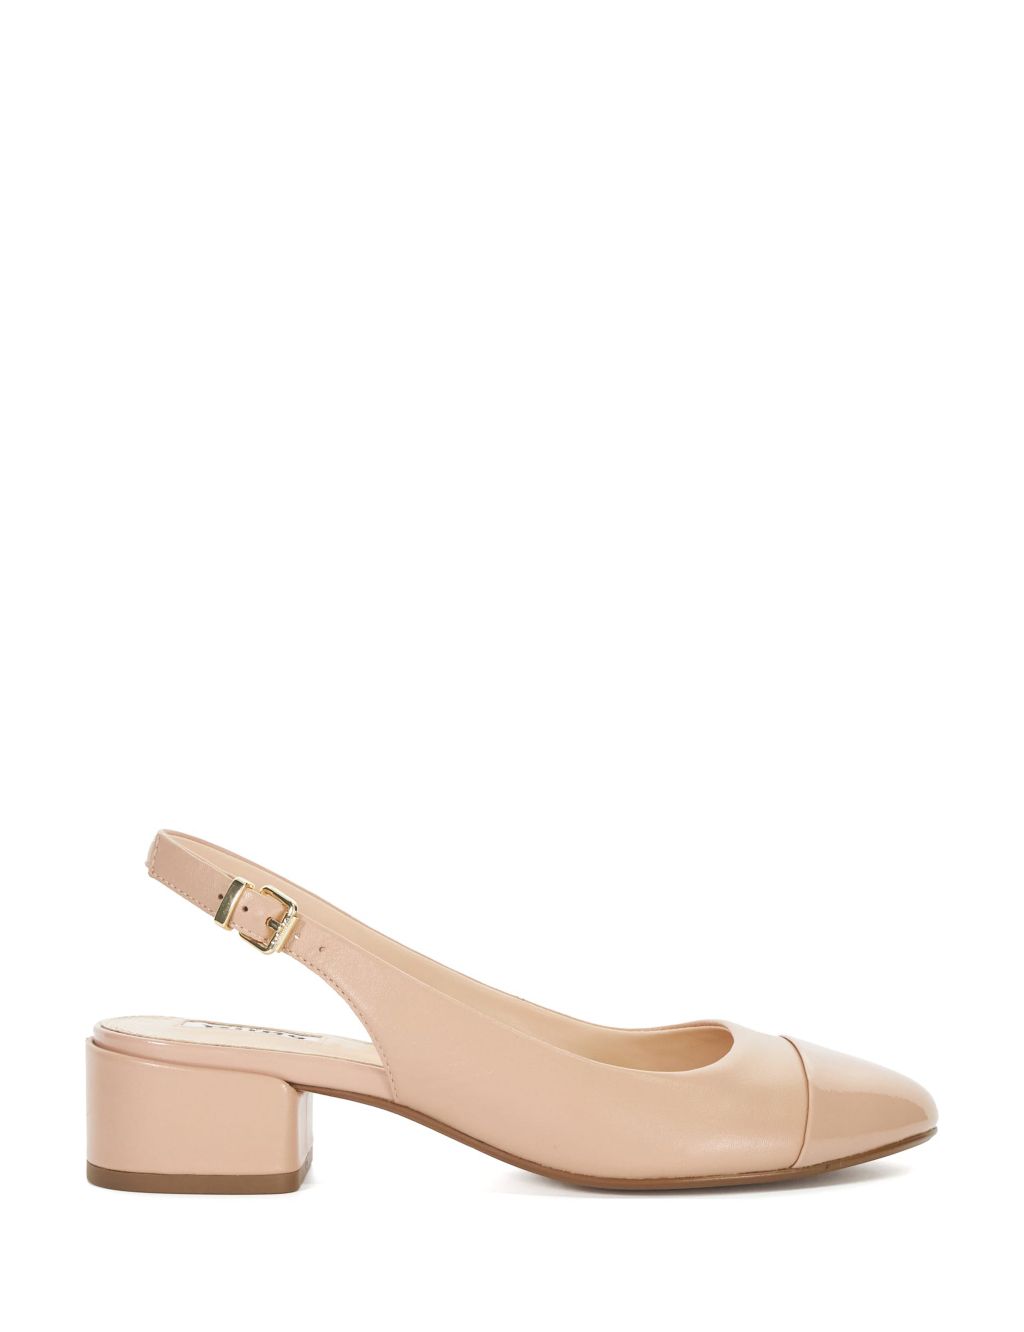 Leather Block Heel Slingback Shoes 3 of 5